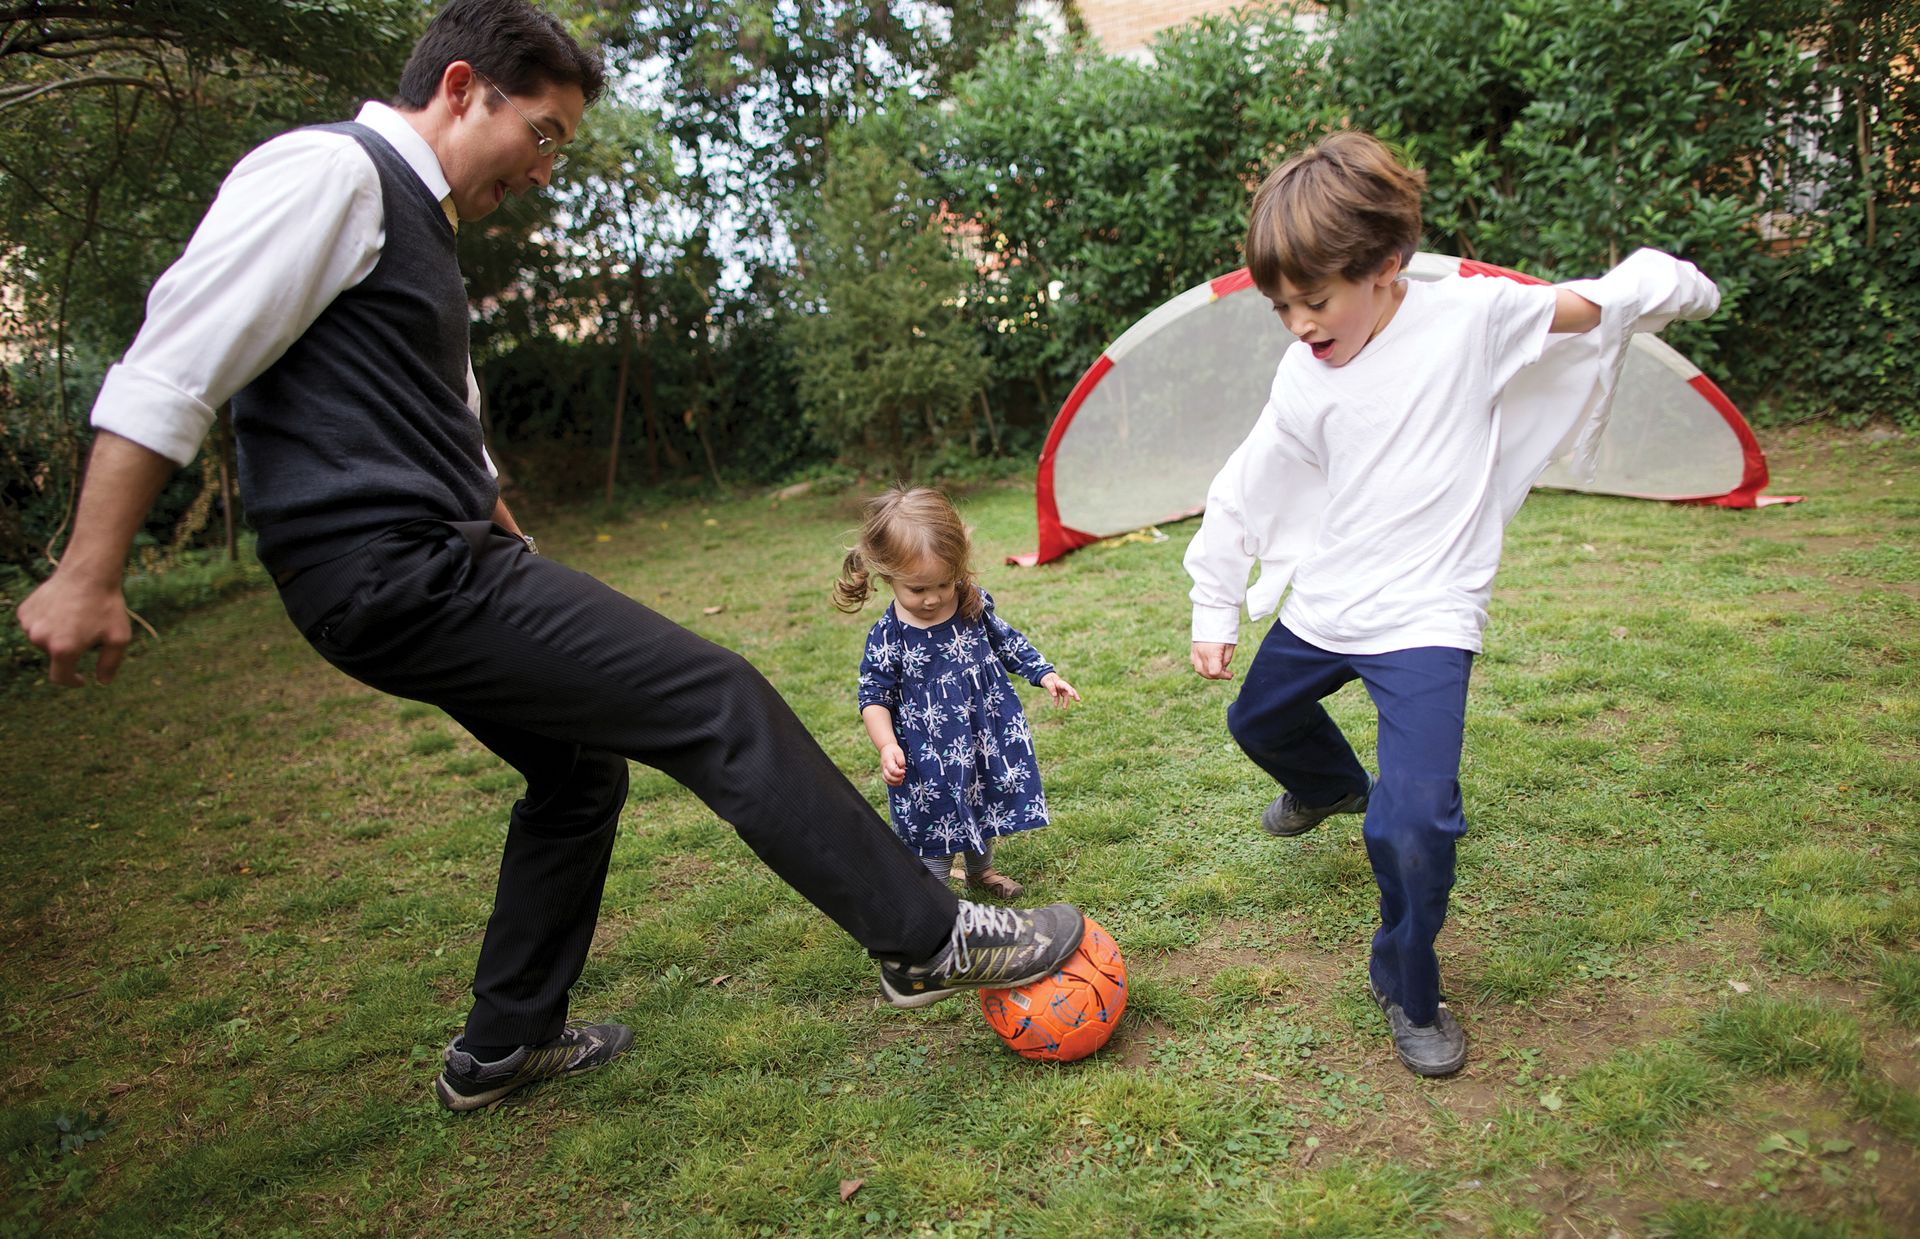 Niki plays soccer with his children.